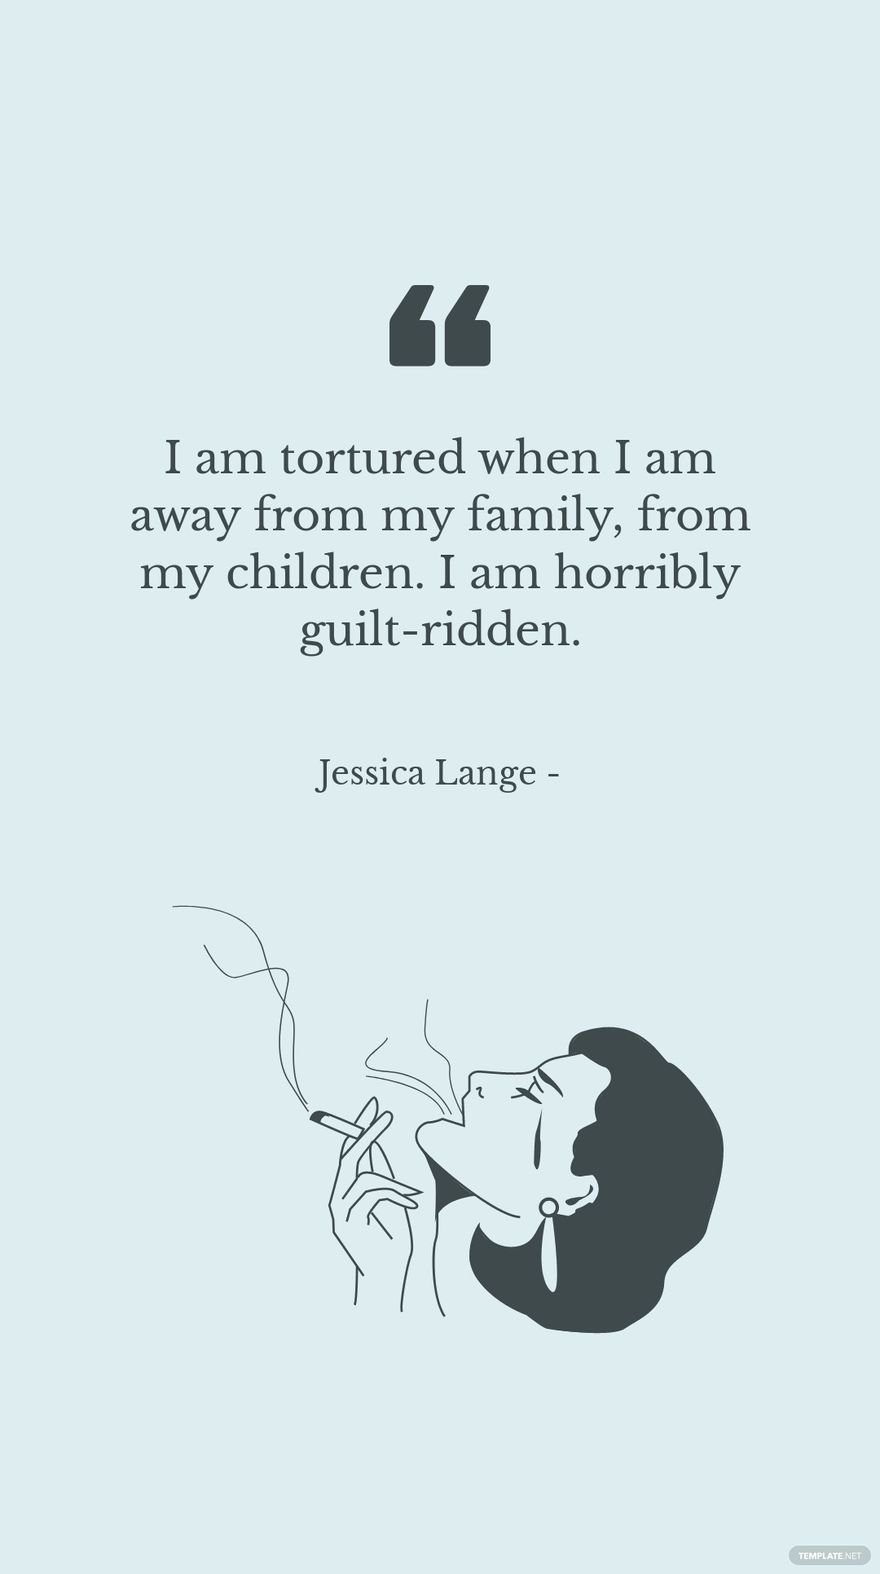 Jessica Lange - I am tortured when I am away from my family, from my children. I am horribly guilt-ridden.